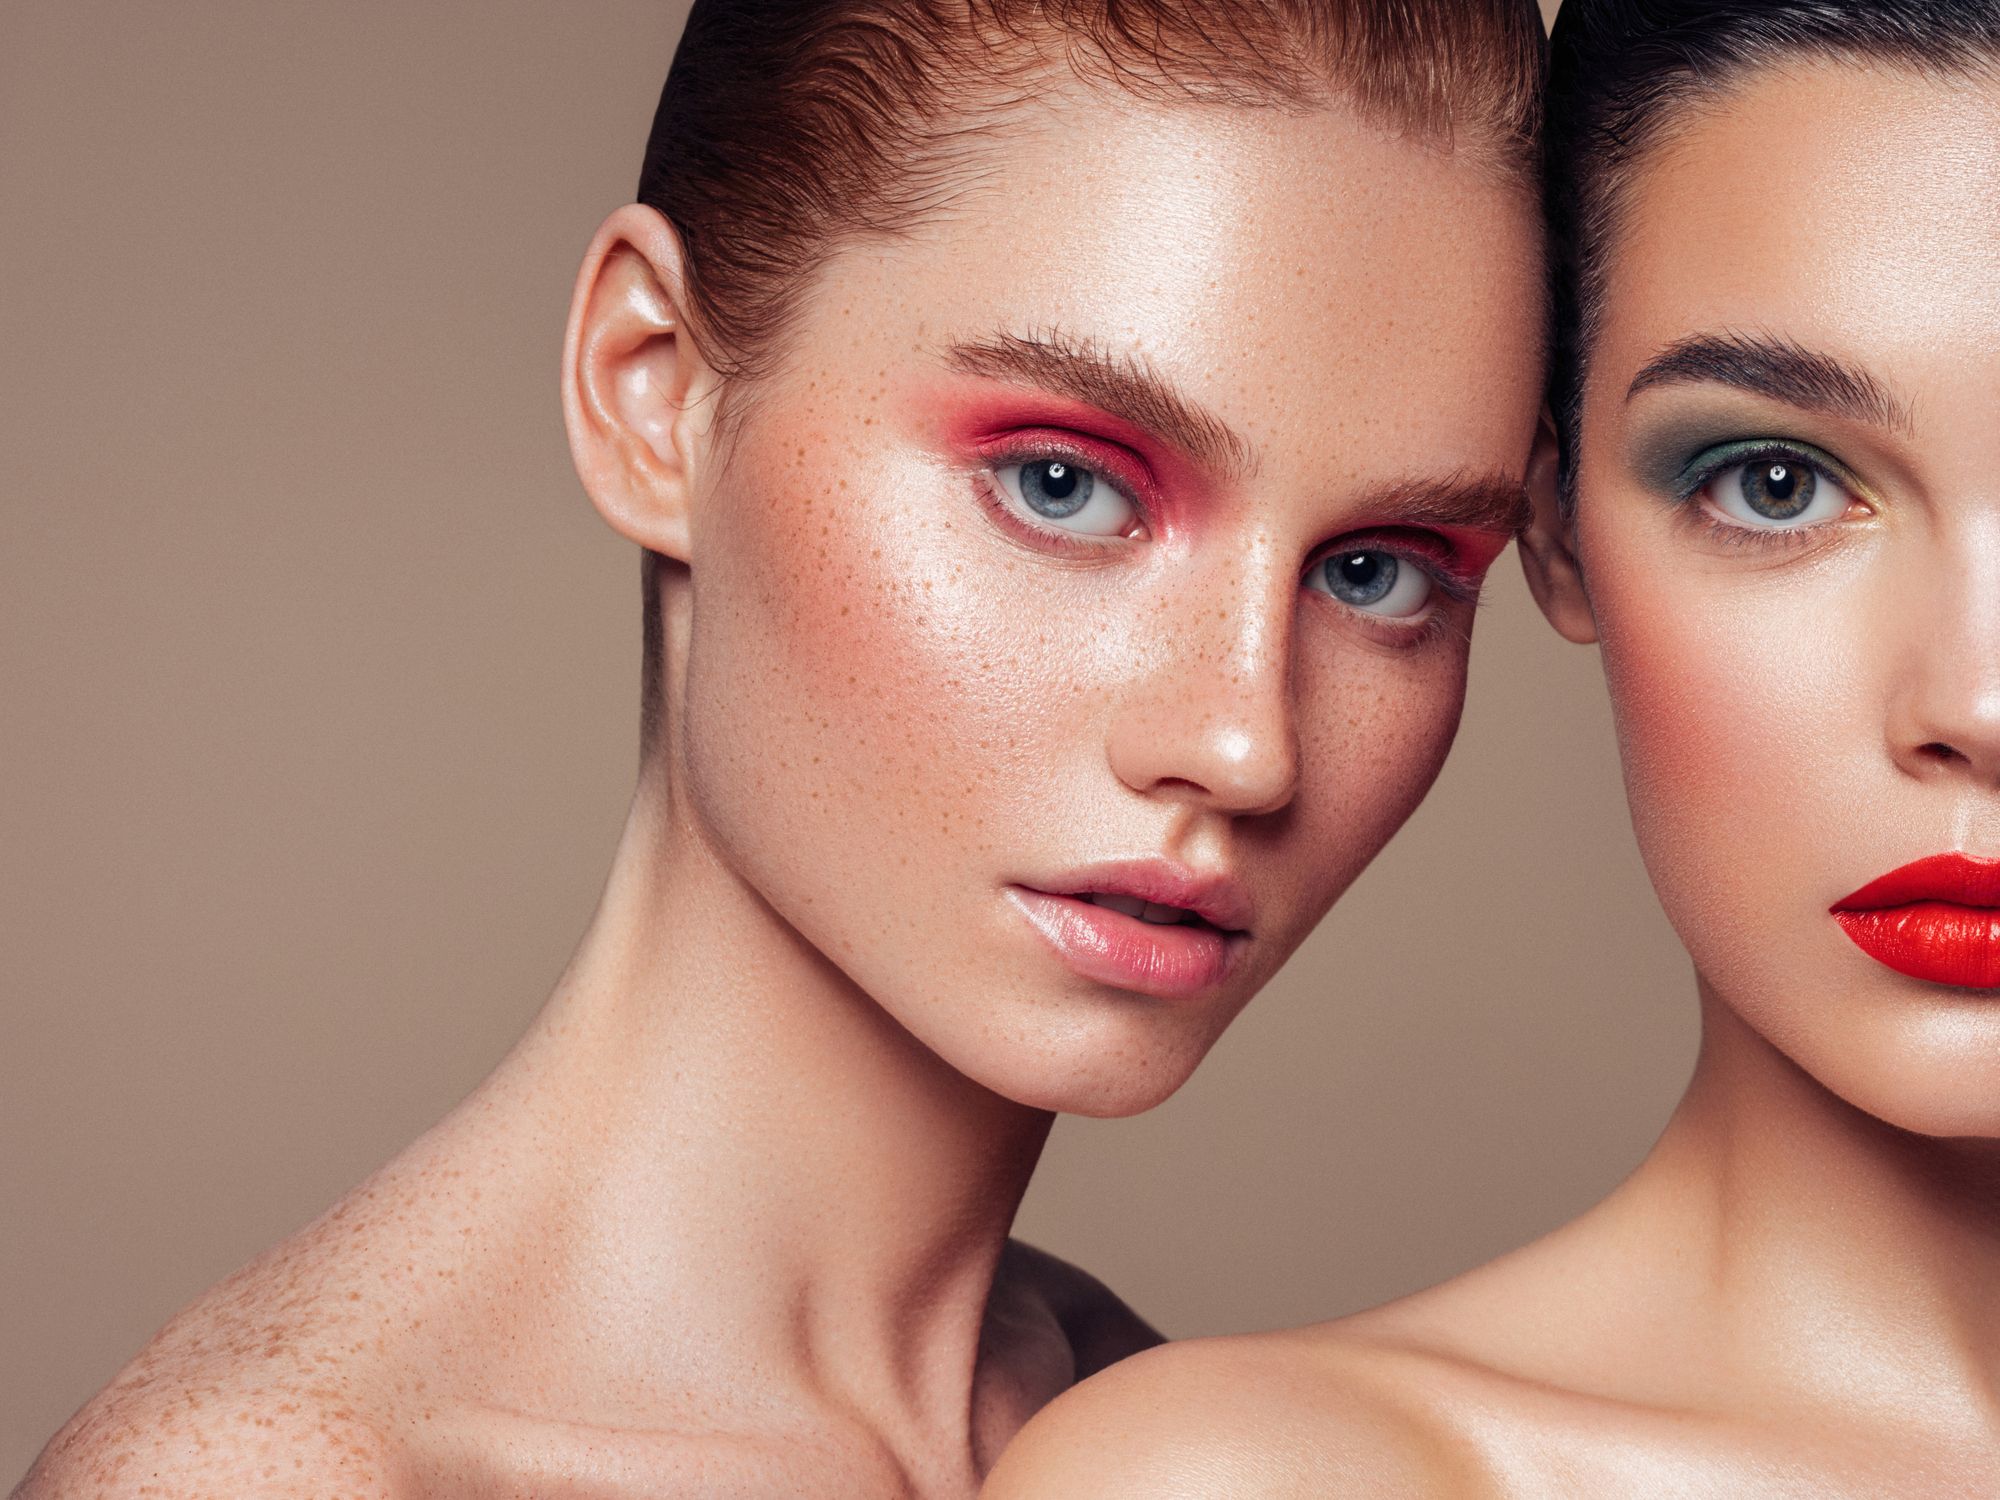 Exploring New Frontiers in Makeup Trends: What's In and Hot?